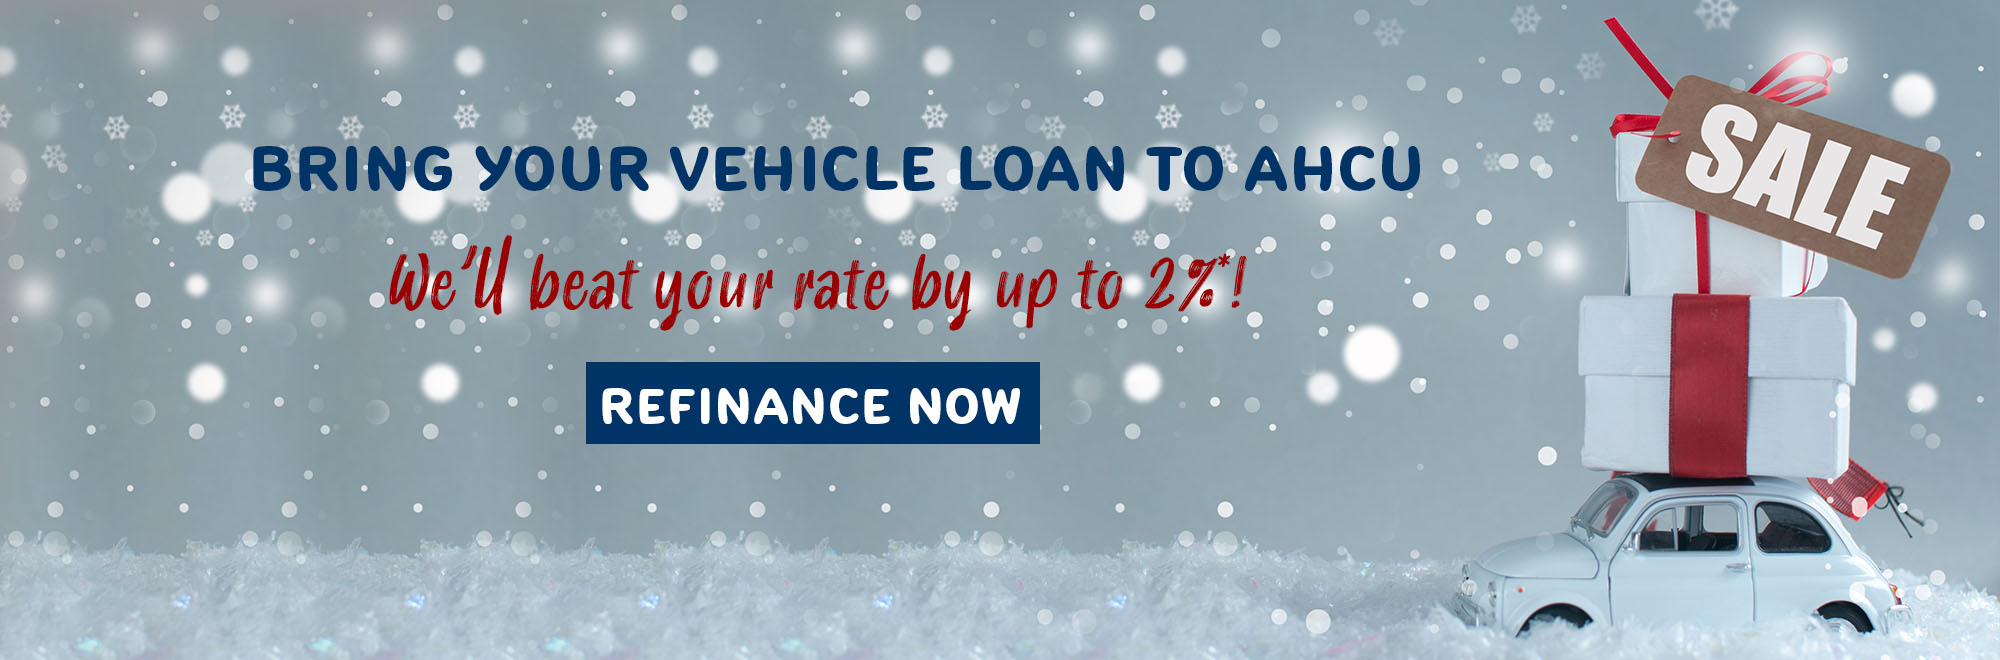 Bring your vehicle loan to AHCU. We'll beat your rate by up to 2%